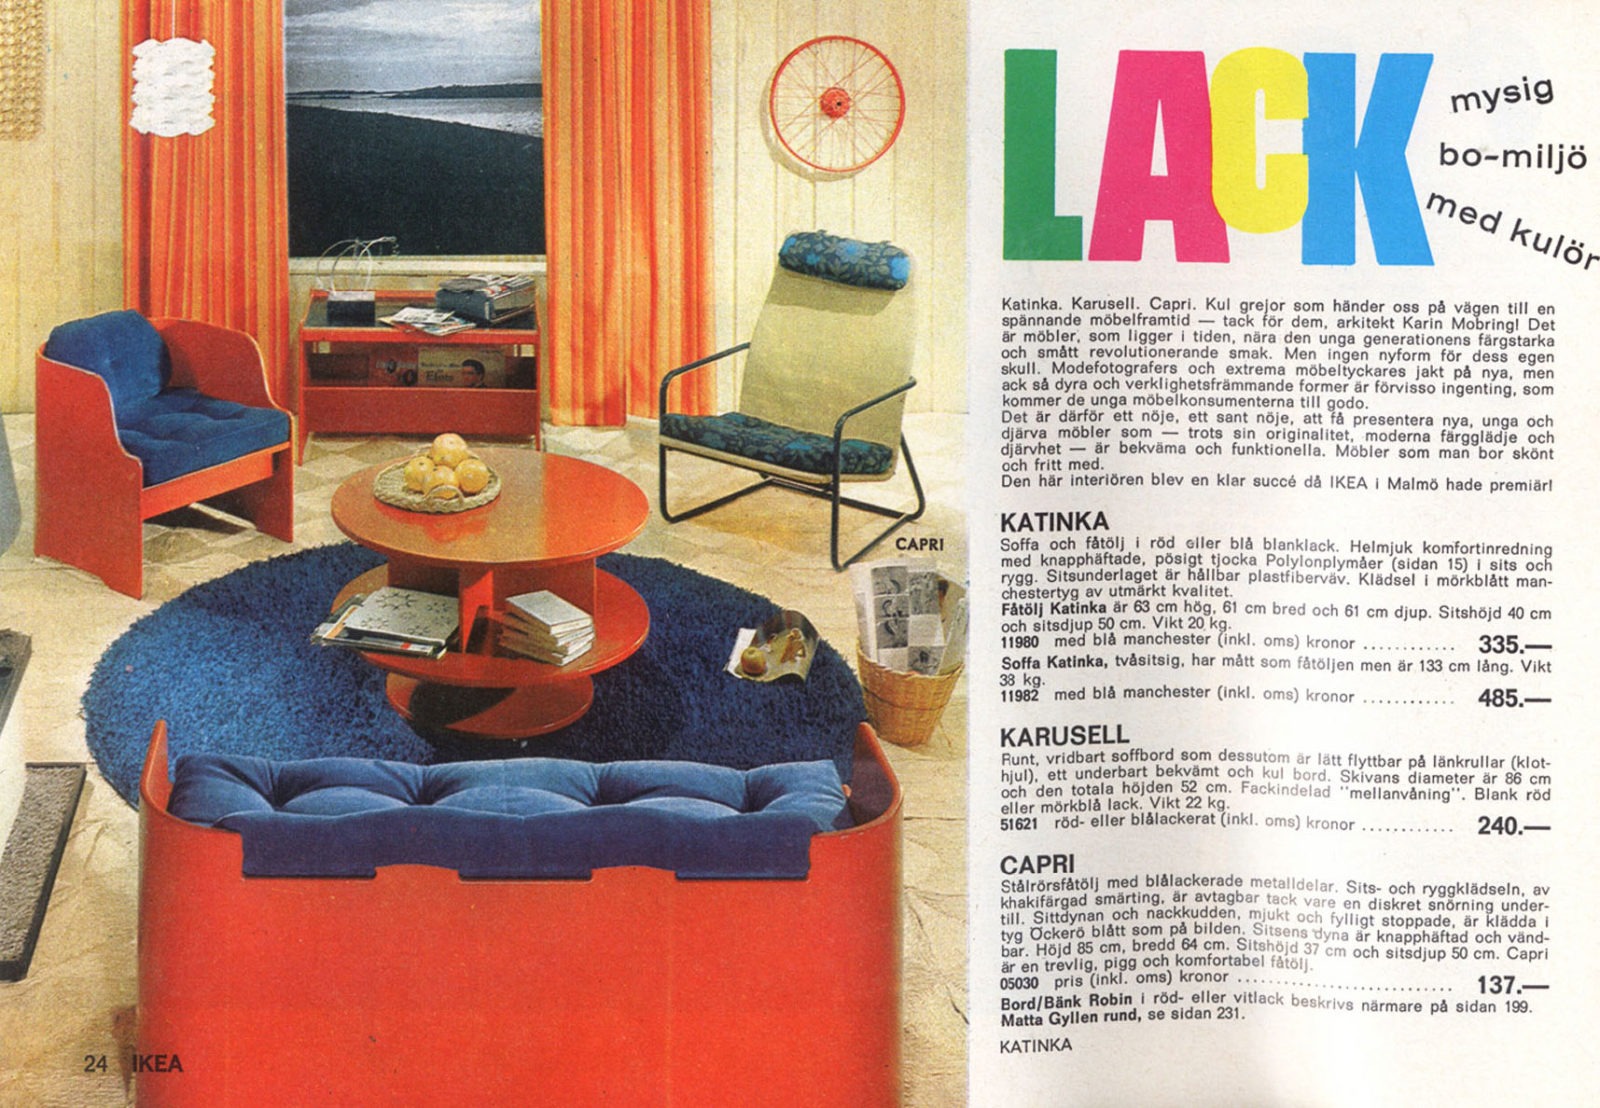 Catalogue spread with youthful 1960s interior, low wood furniture in bright red and blue, vinyl records in background.